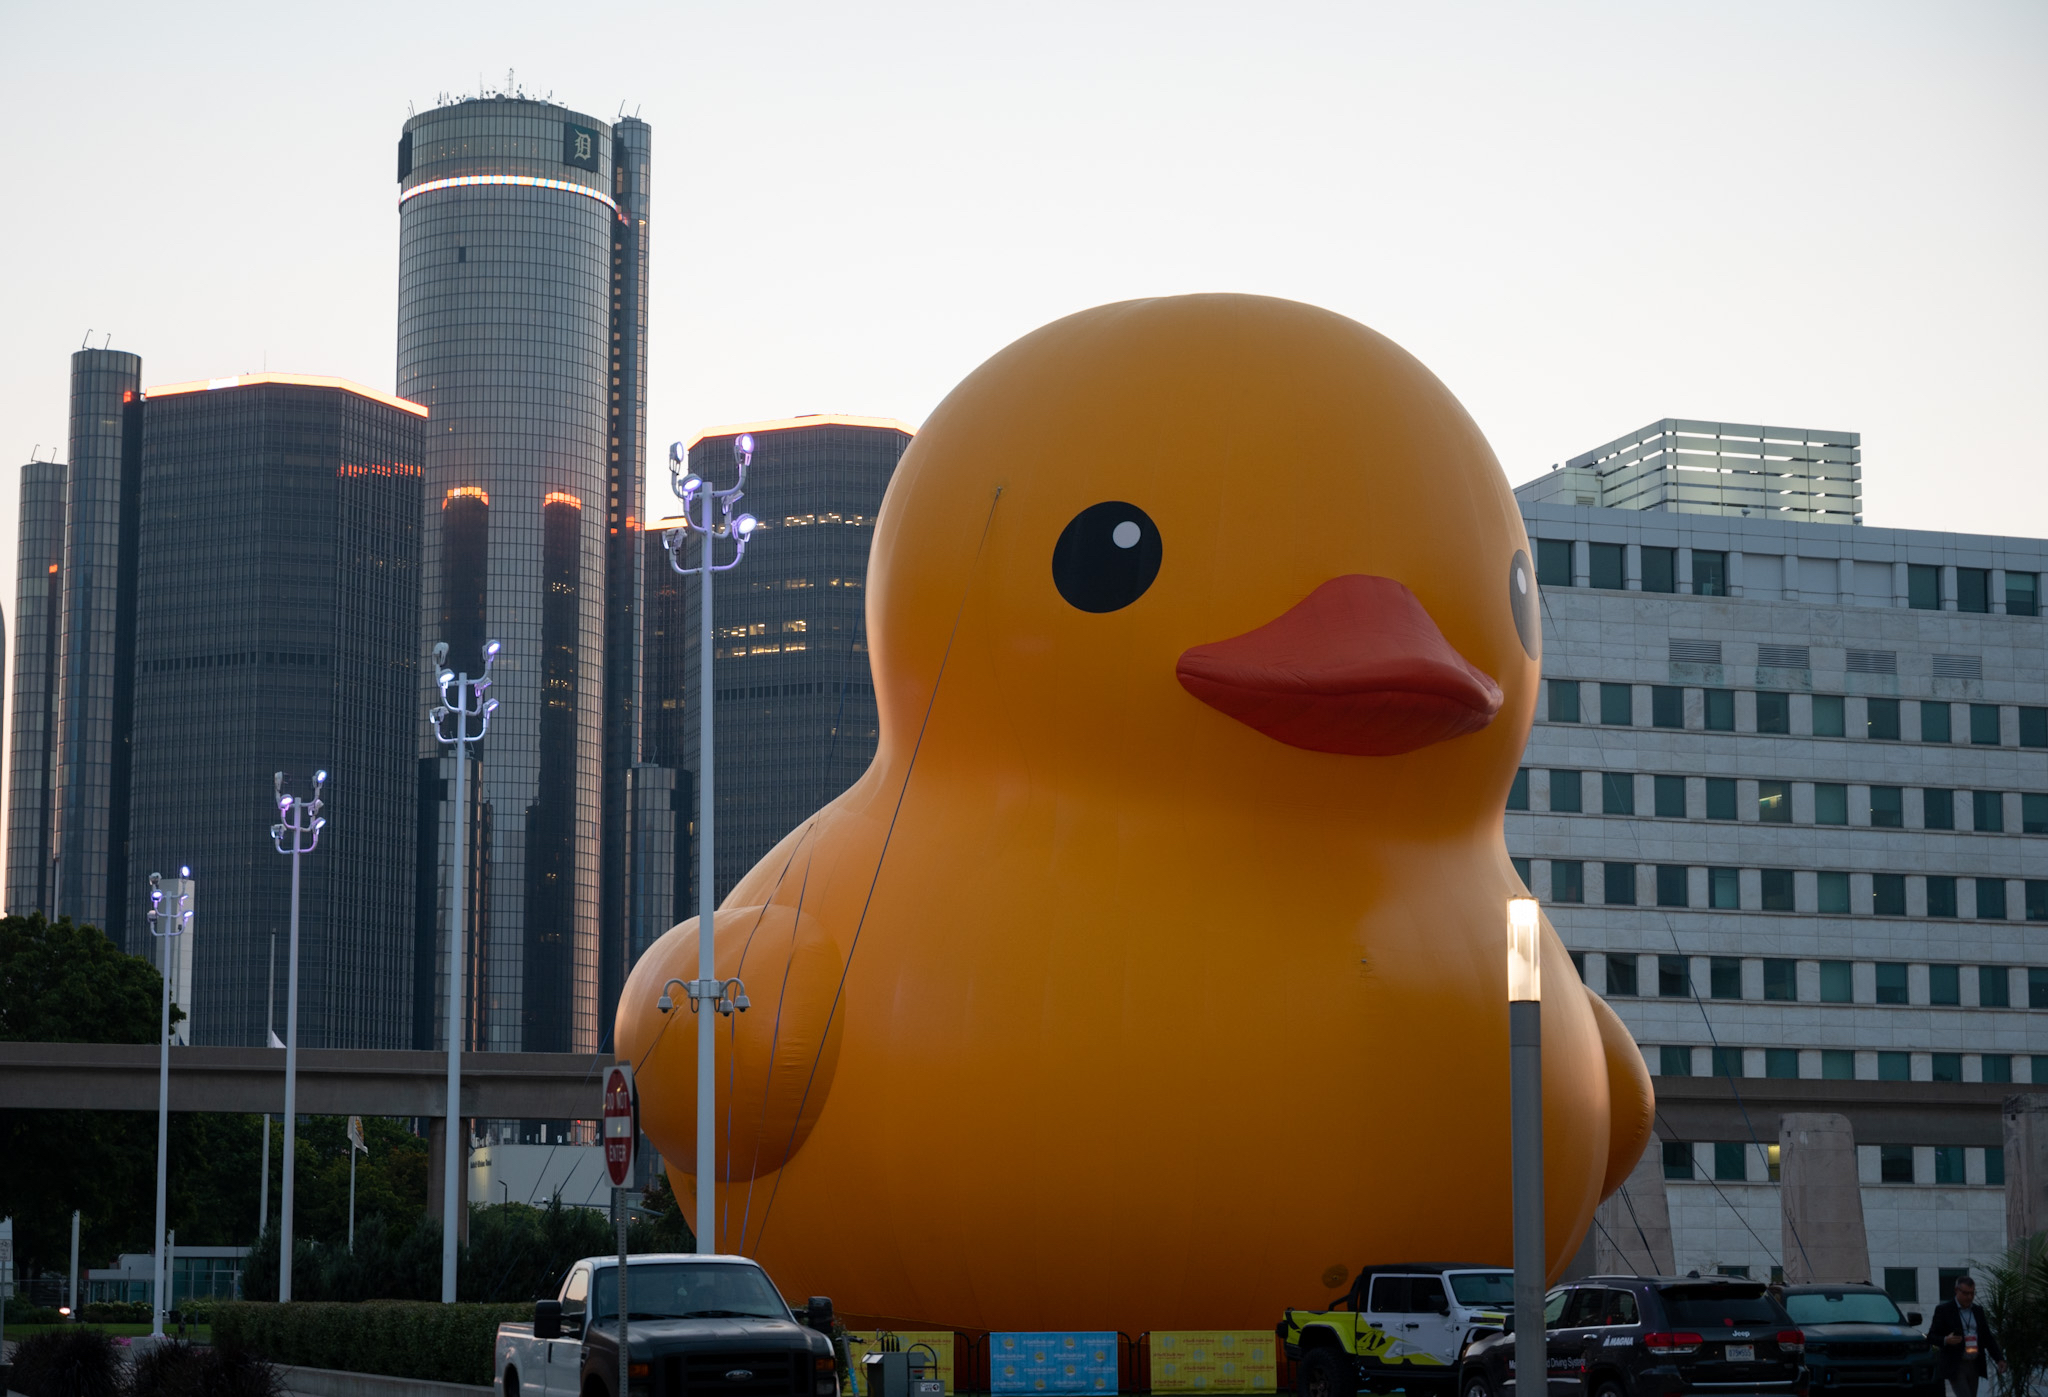 A giant inflatable duck sits outside Hart Plaza with the Detroit Renaissance Center in the background as the 2022 North American International Auto Show begins with media preview day at Huntington Place in Detroit on Wednesday, Sept. 14 2022.